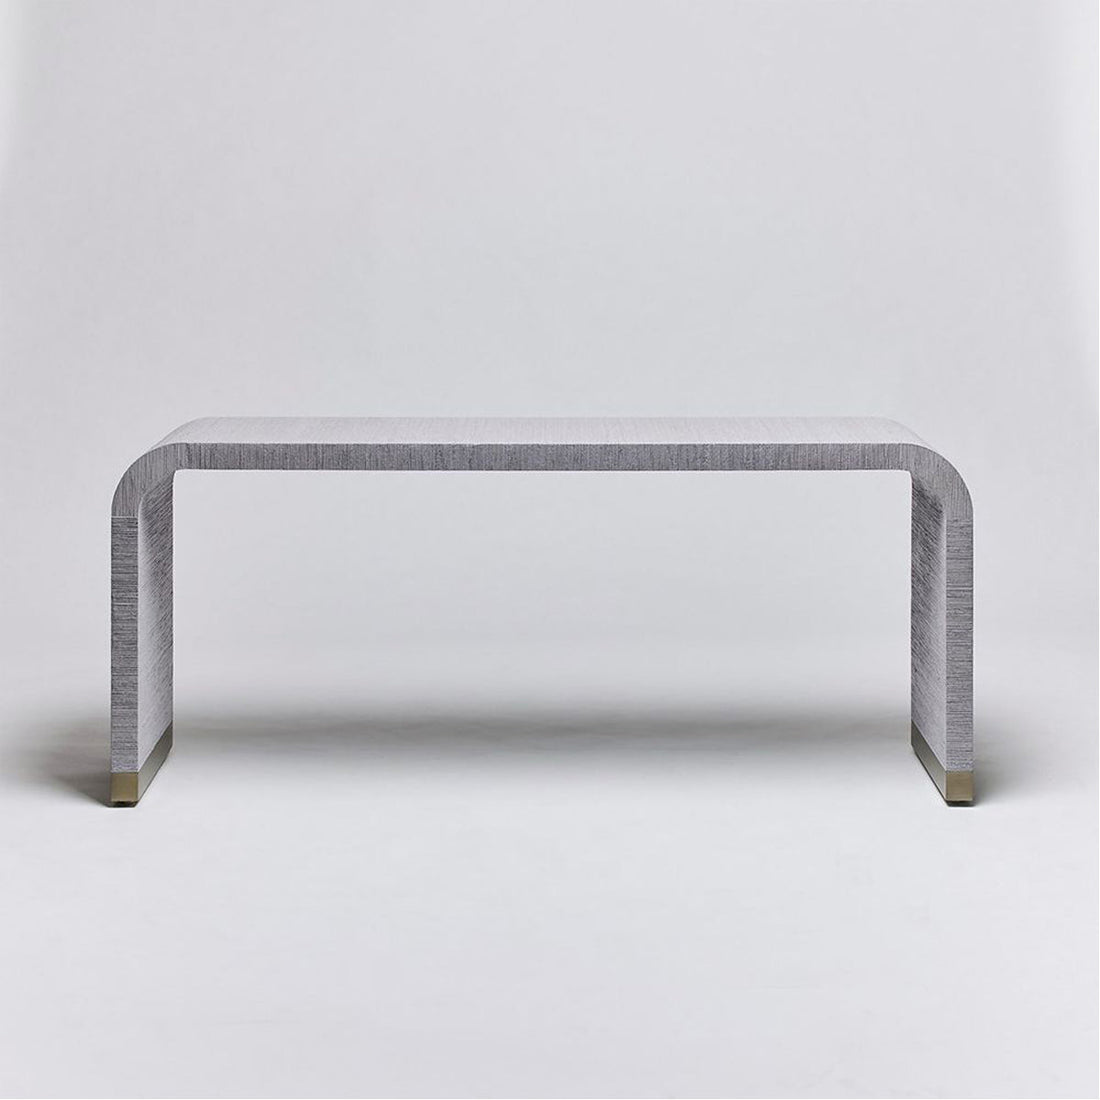 Interlude Home Sutherland Console Table - Mist